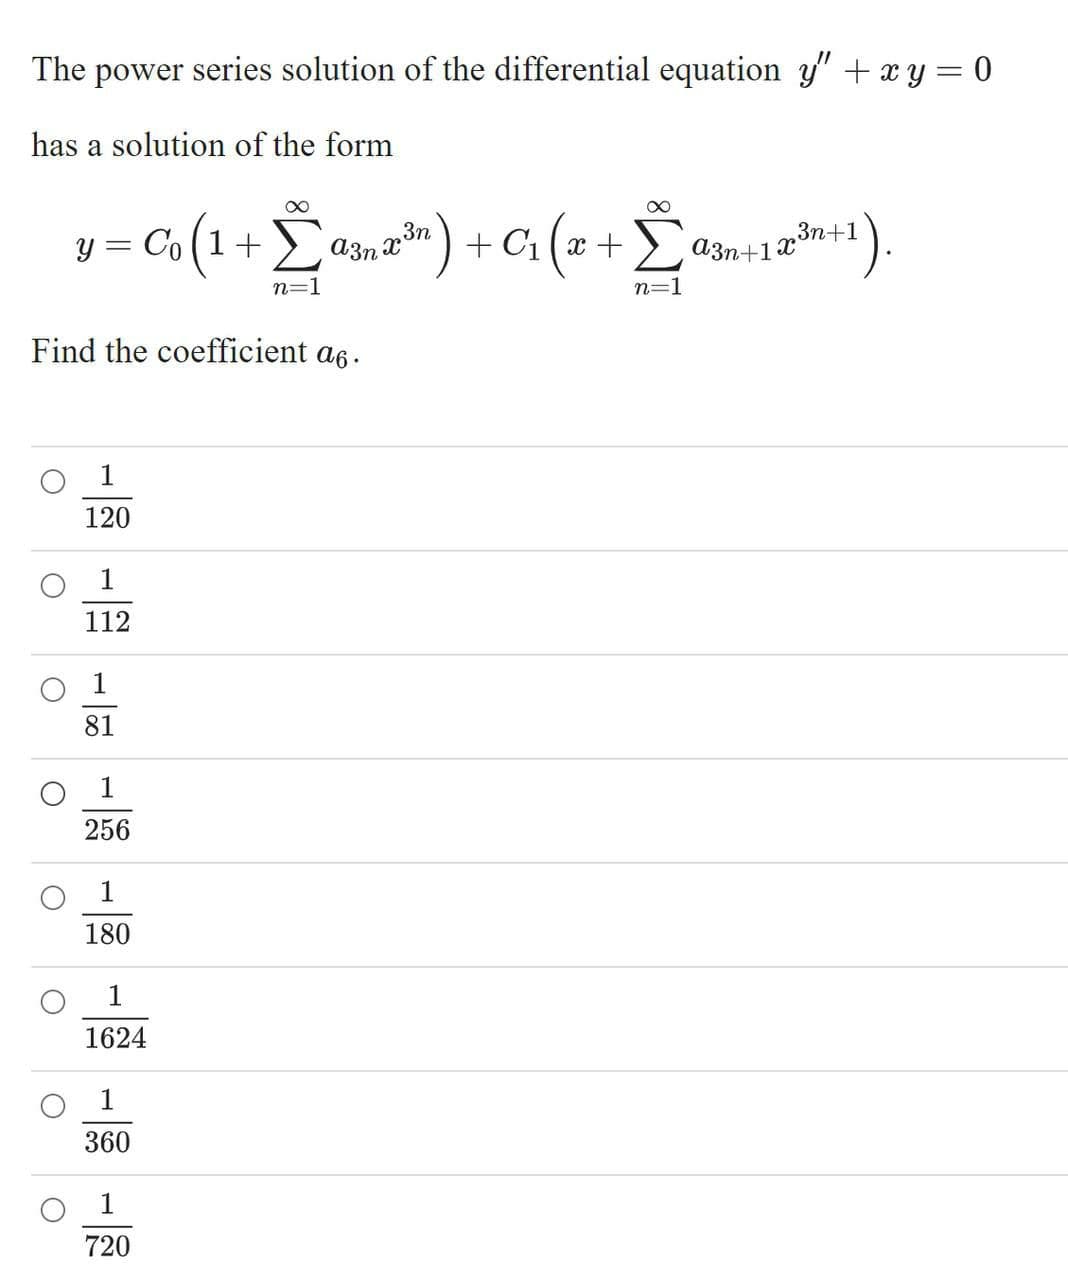 The power series solution of the differential equation y" +xy = 0
has a solution of the form
= C«(1 + Lasnm) + Ci (z +
") + C1 (x + a3n+1®*
a3n x
23n+1
y =
n=1
n=1
Find the coefficient a6.
1
120
1
112
81
1
256
1
180
1
1624
1
360
1
720
